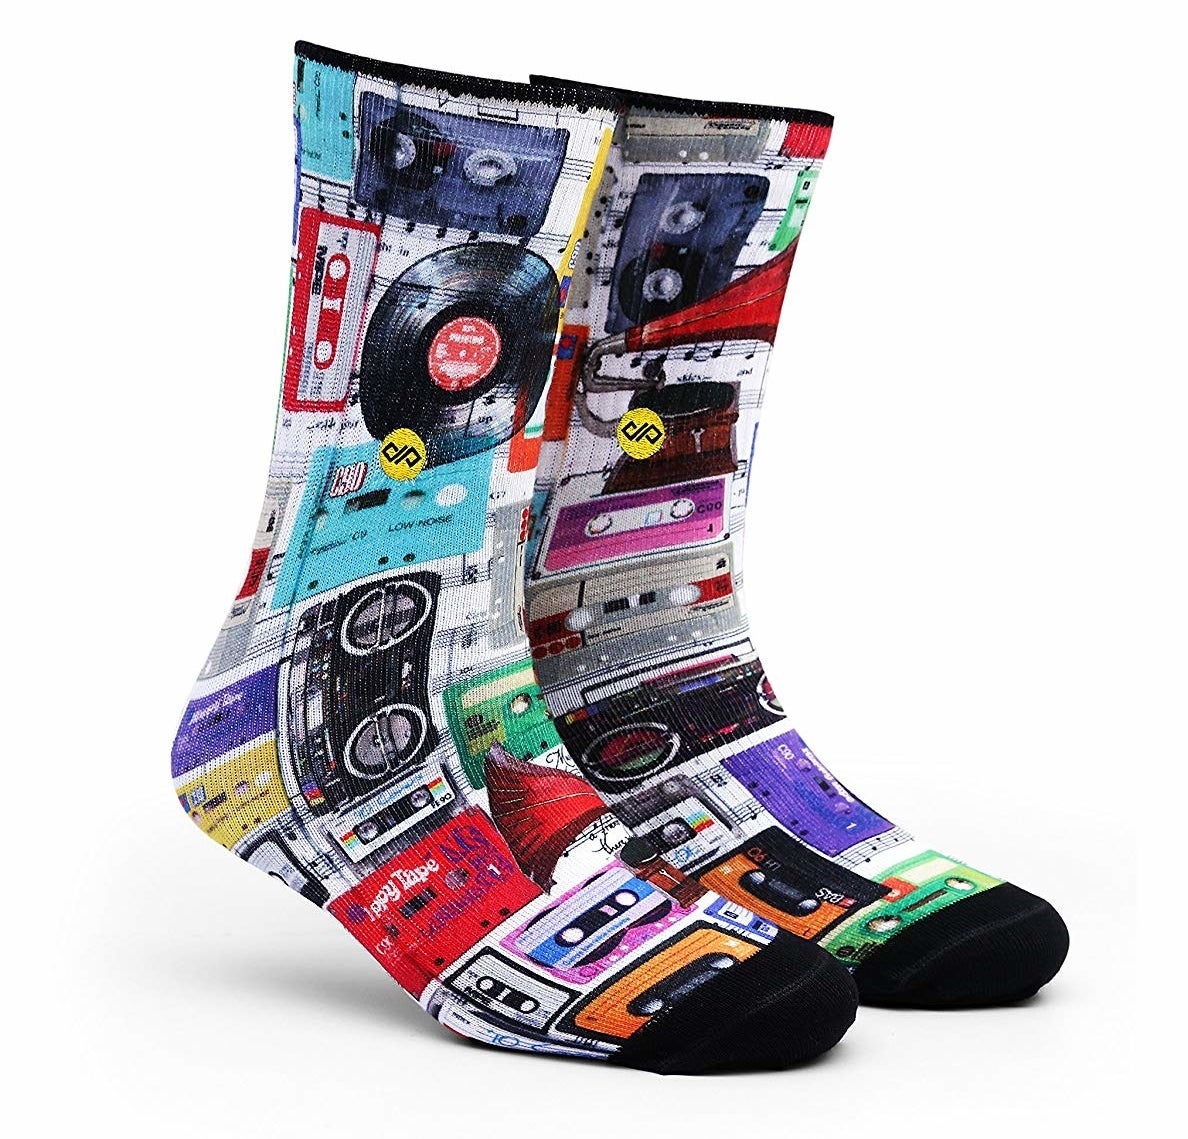 The socks have colourful prints of cassettes, music players, and vinyl records